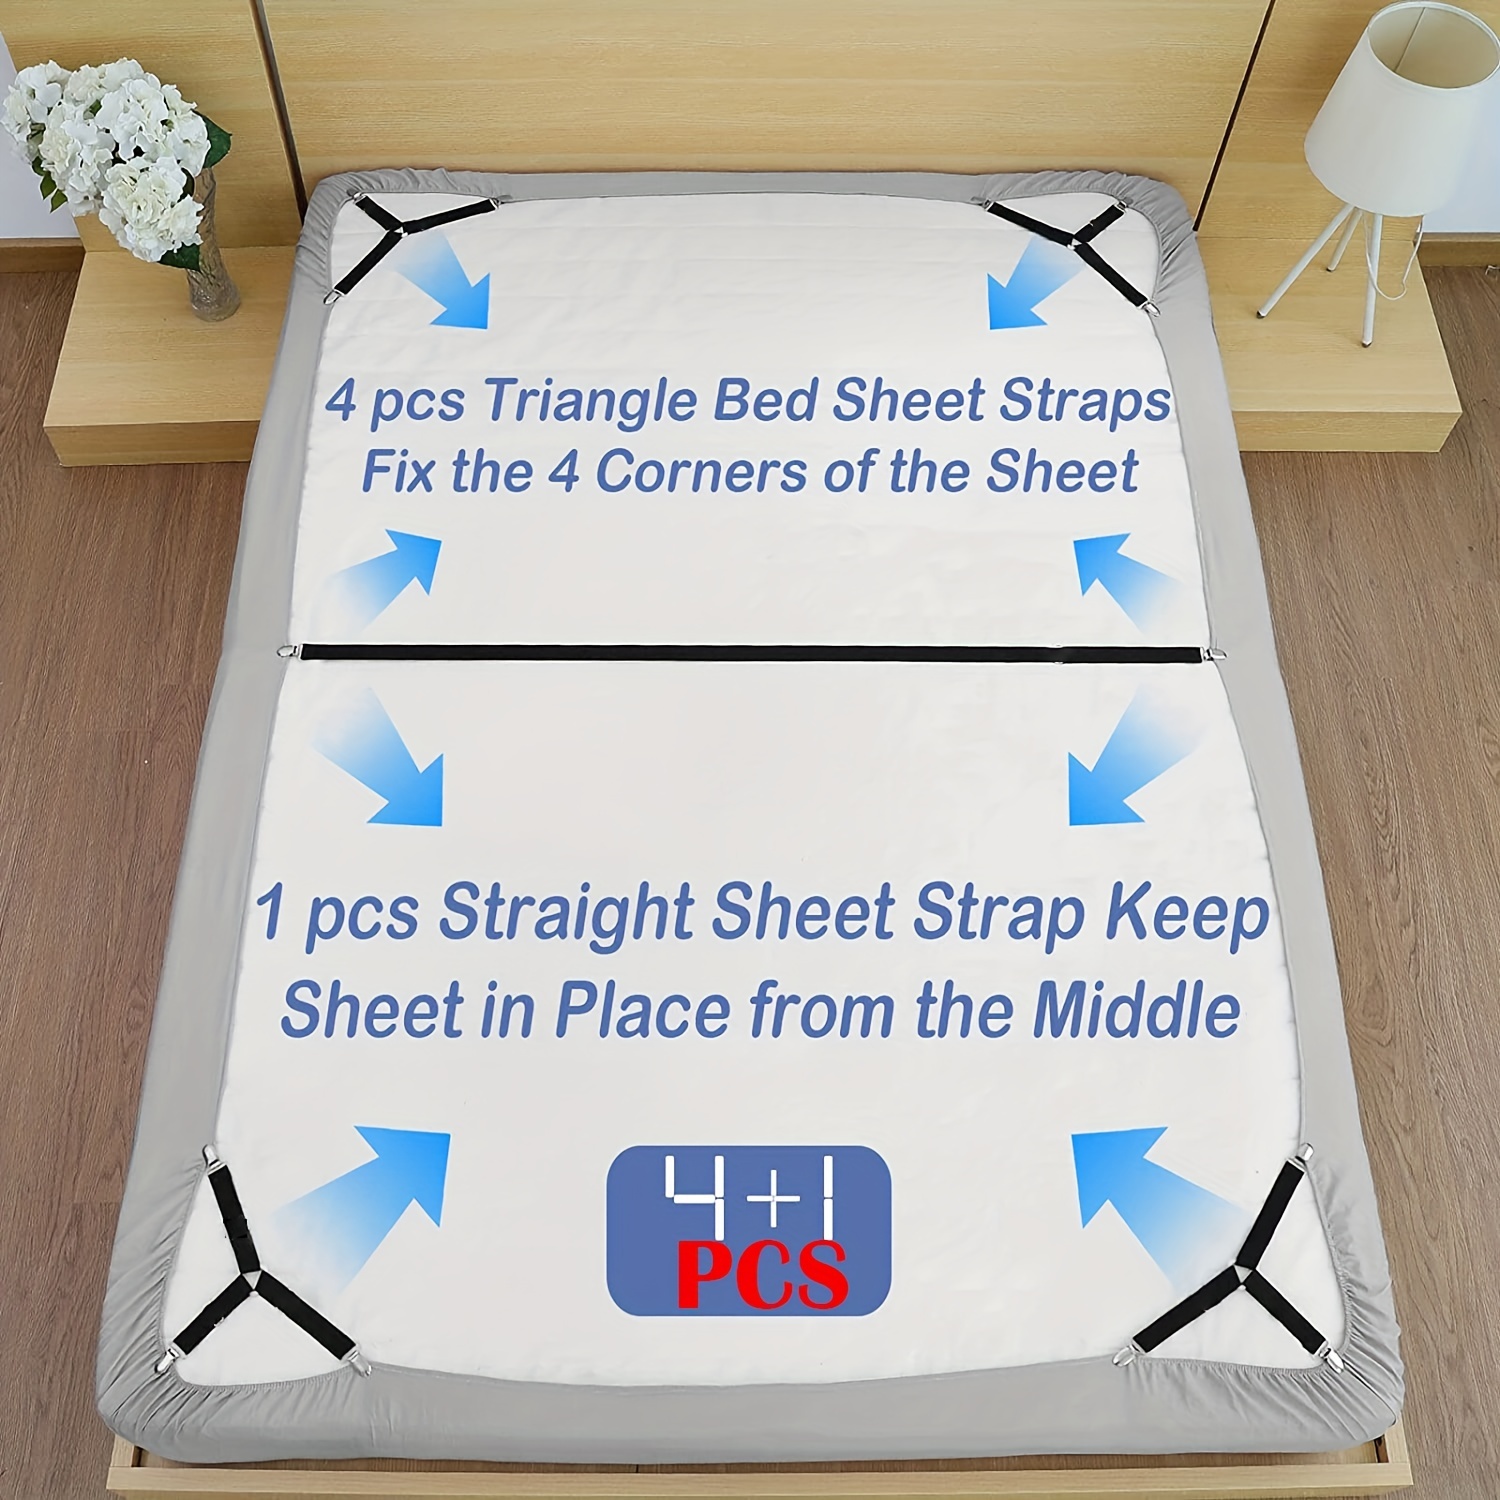 Adjustable Bed Sheet Clips - Securely Fasten Your Sheets To The